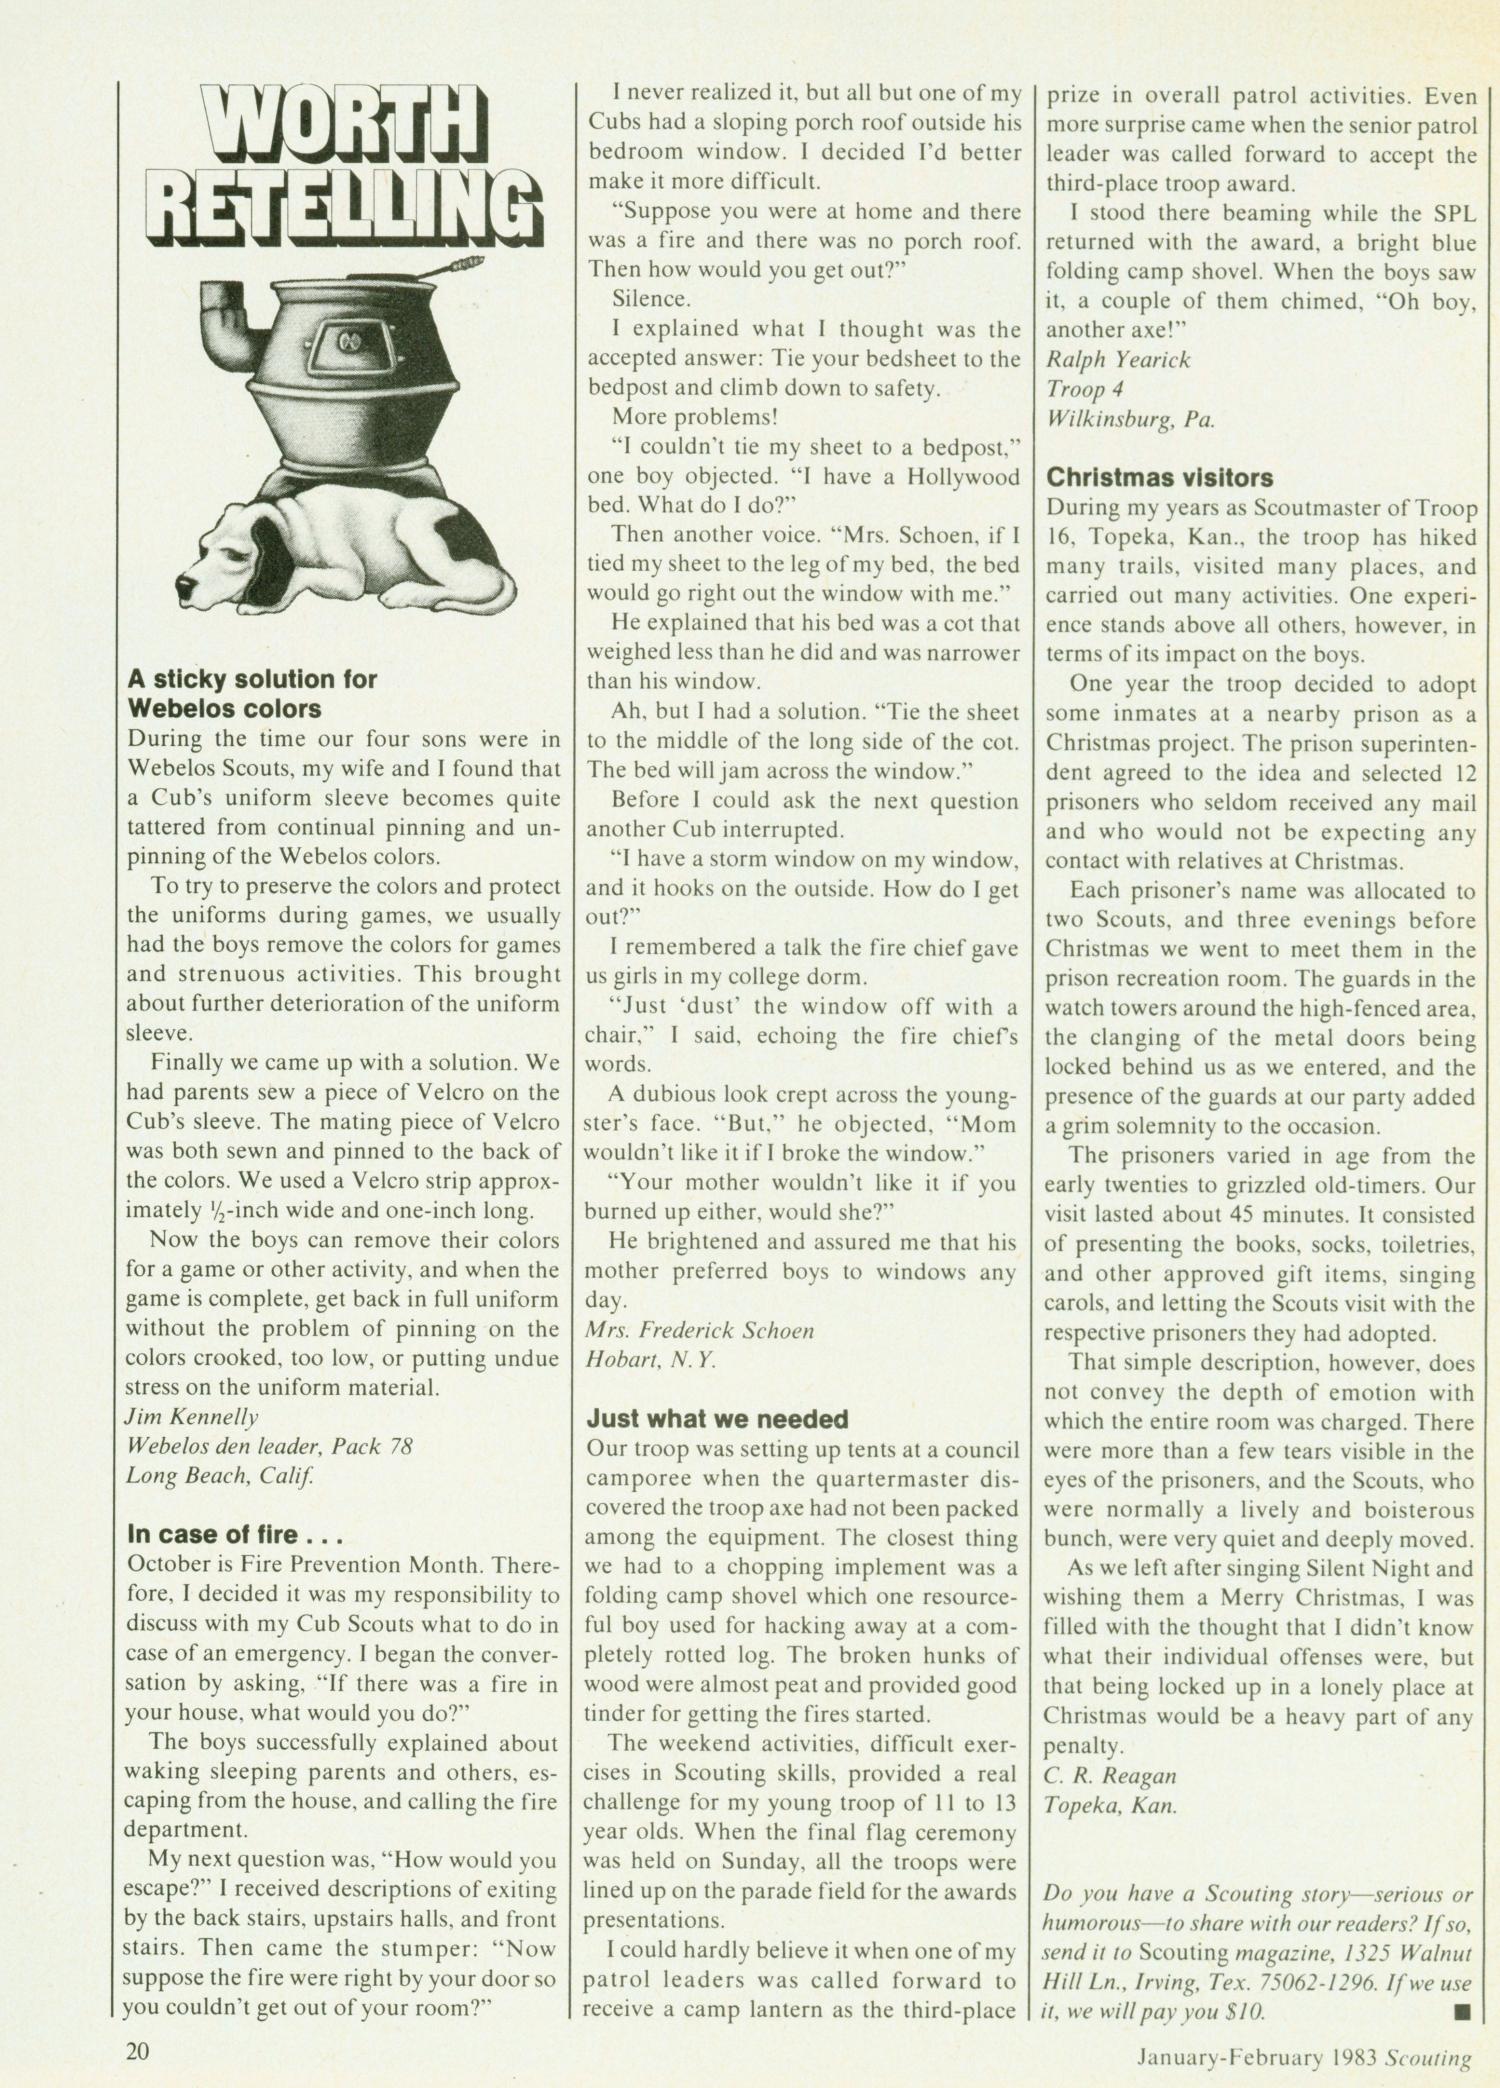 Scouting, Volume 71, Number 1, January-February 1983
                                                
                                                    20
                                                